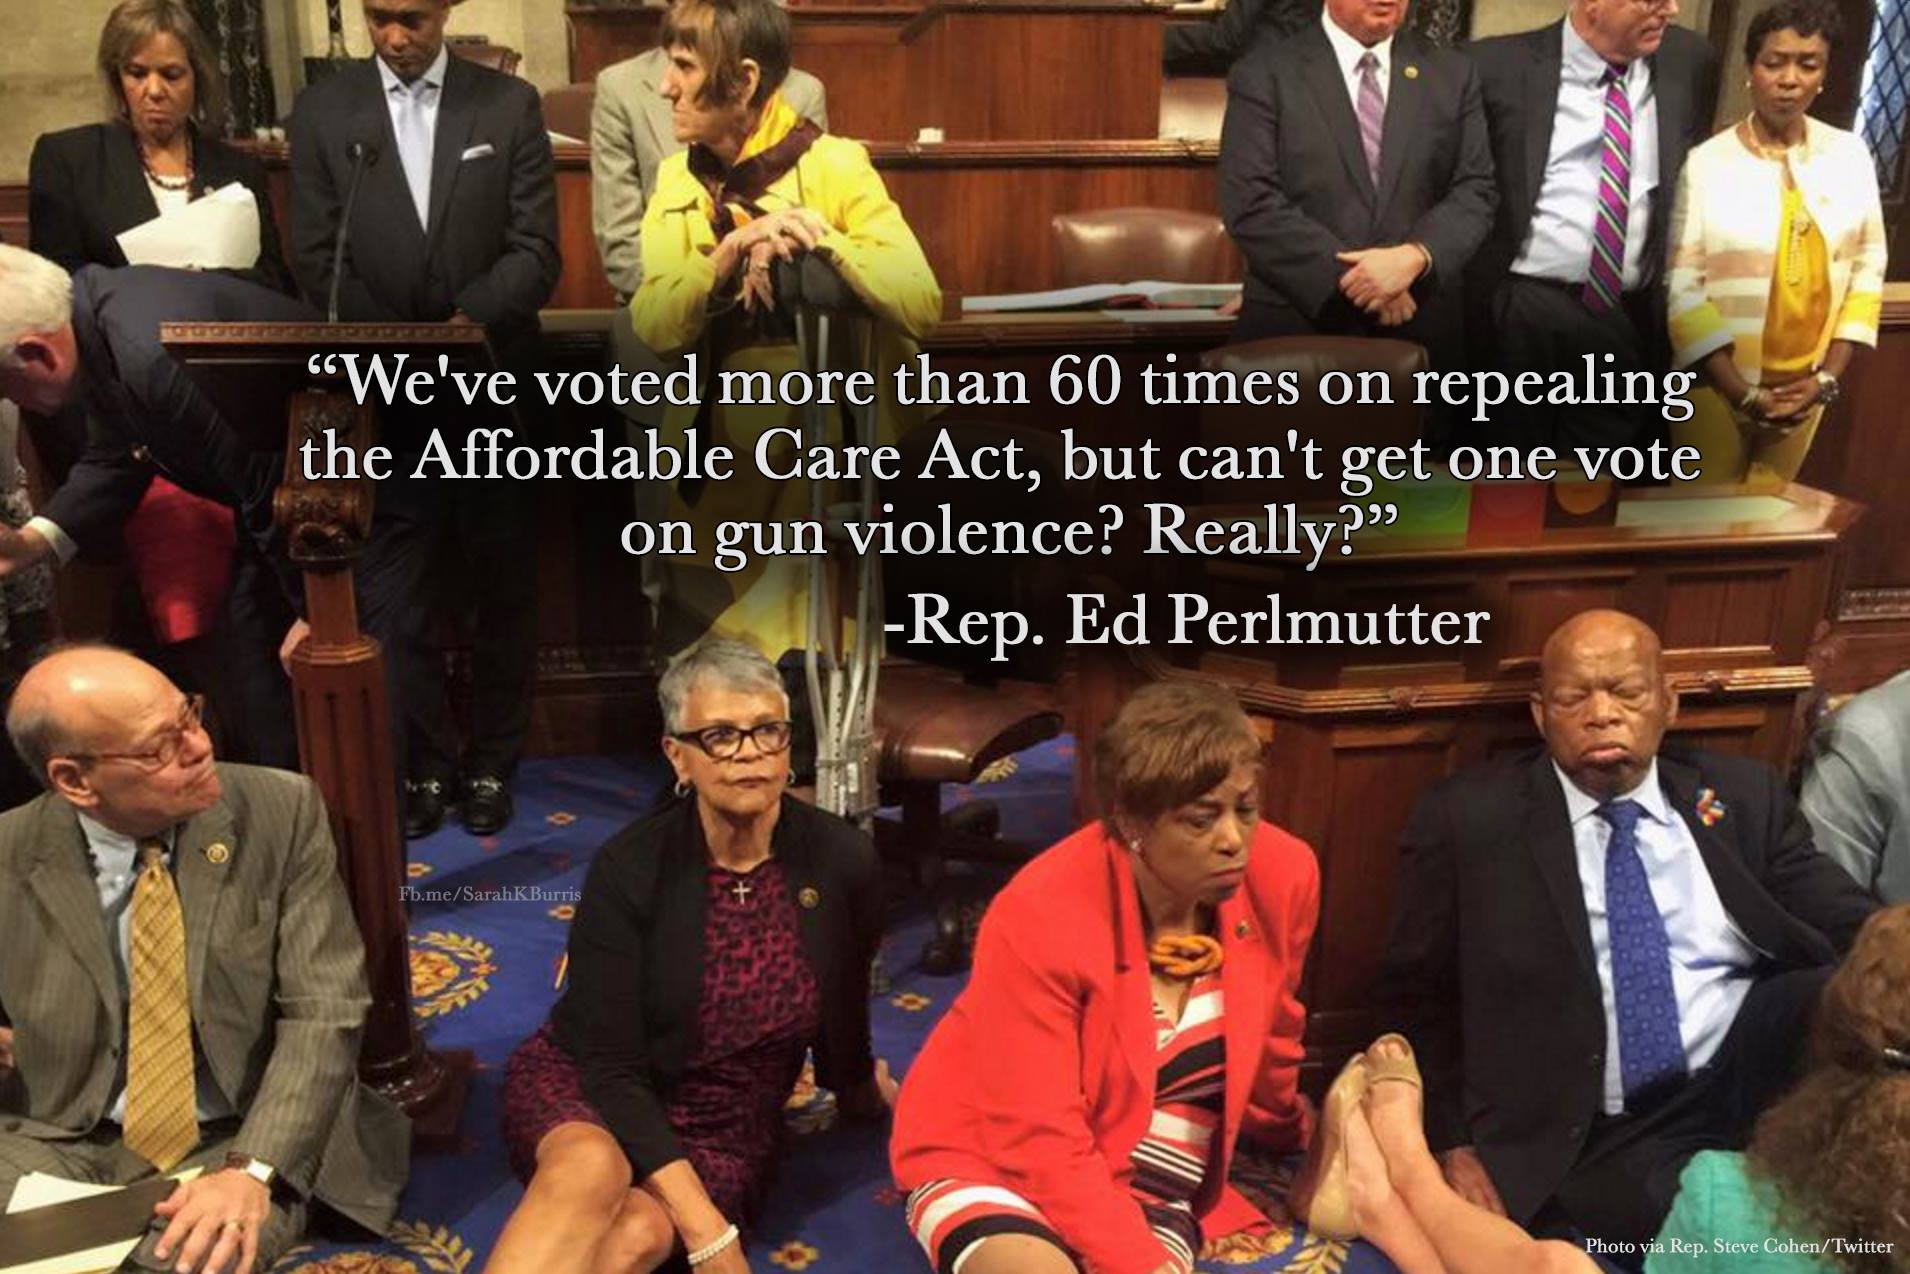 we've voted more than 60 times on repealing the affordable care act, but can't get one vote on gun violence? really?, rep. ed perlmutter